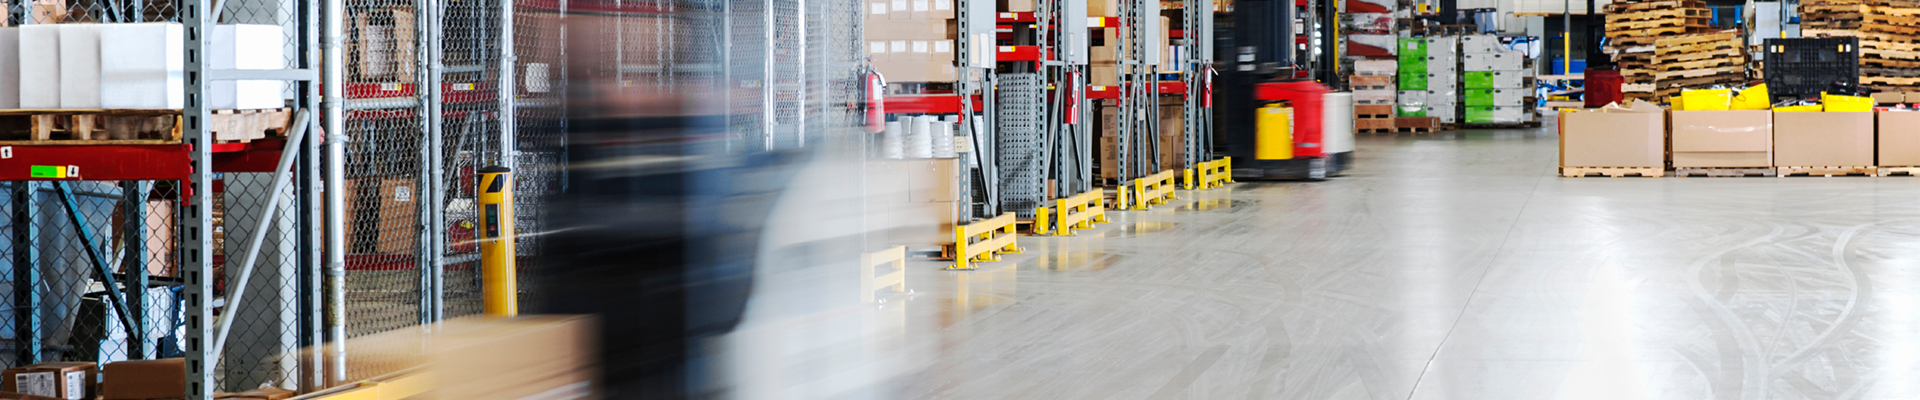 5 Ways To Keep Your Warehouse Clean